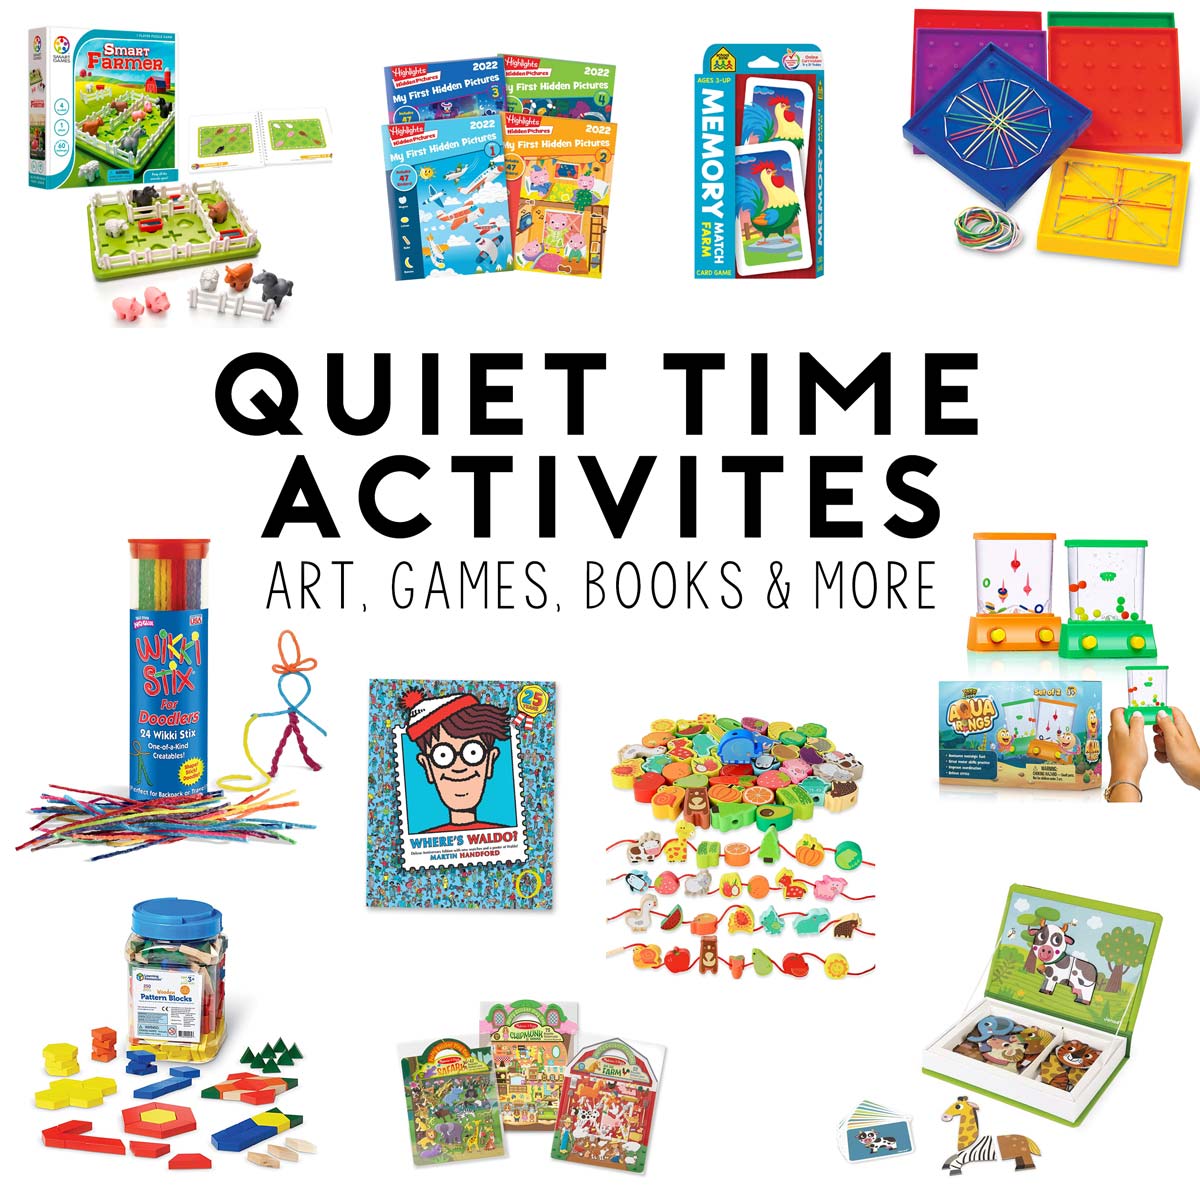 Quiet time activities: art, games, books, and more - image is white with images of toys for kids.